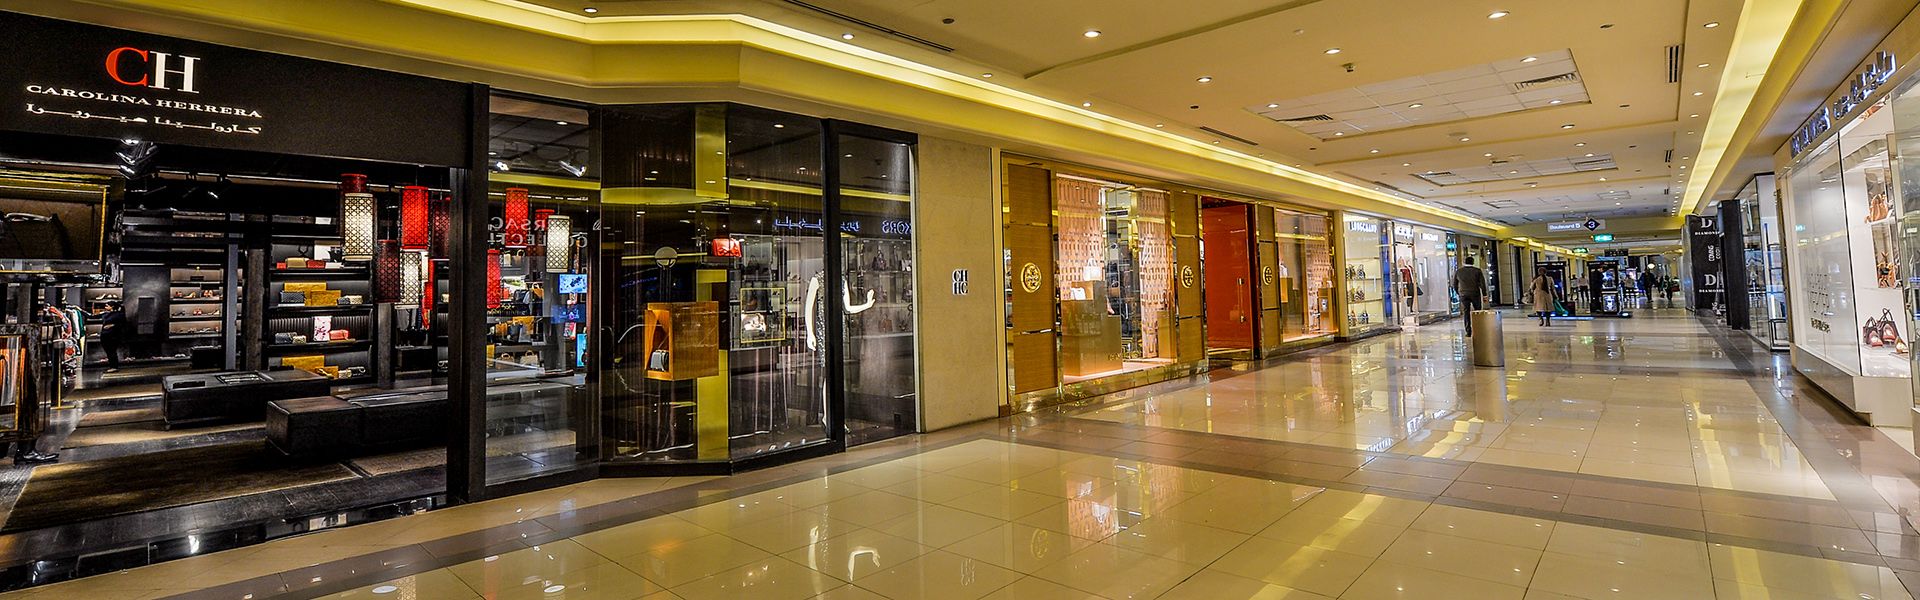 Citystars Shopping Mall Over 750 Luxurious Stores